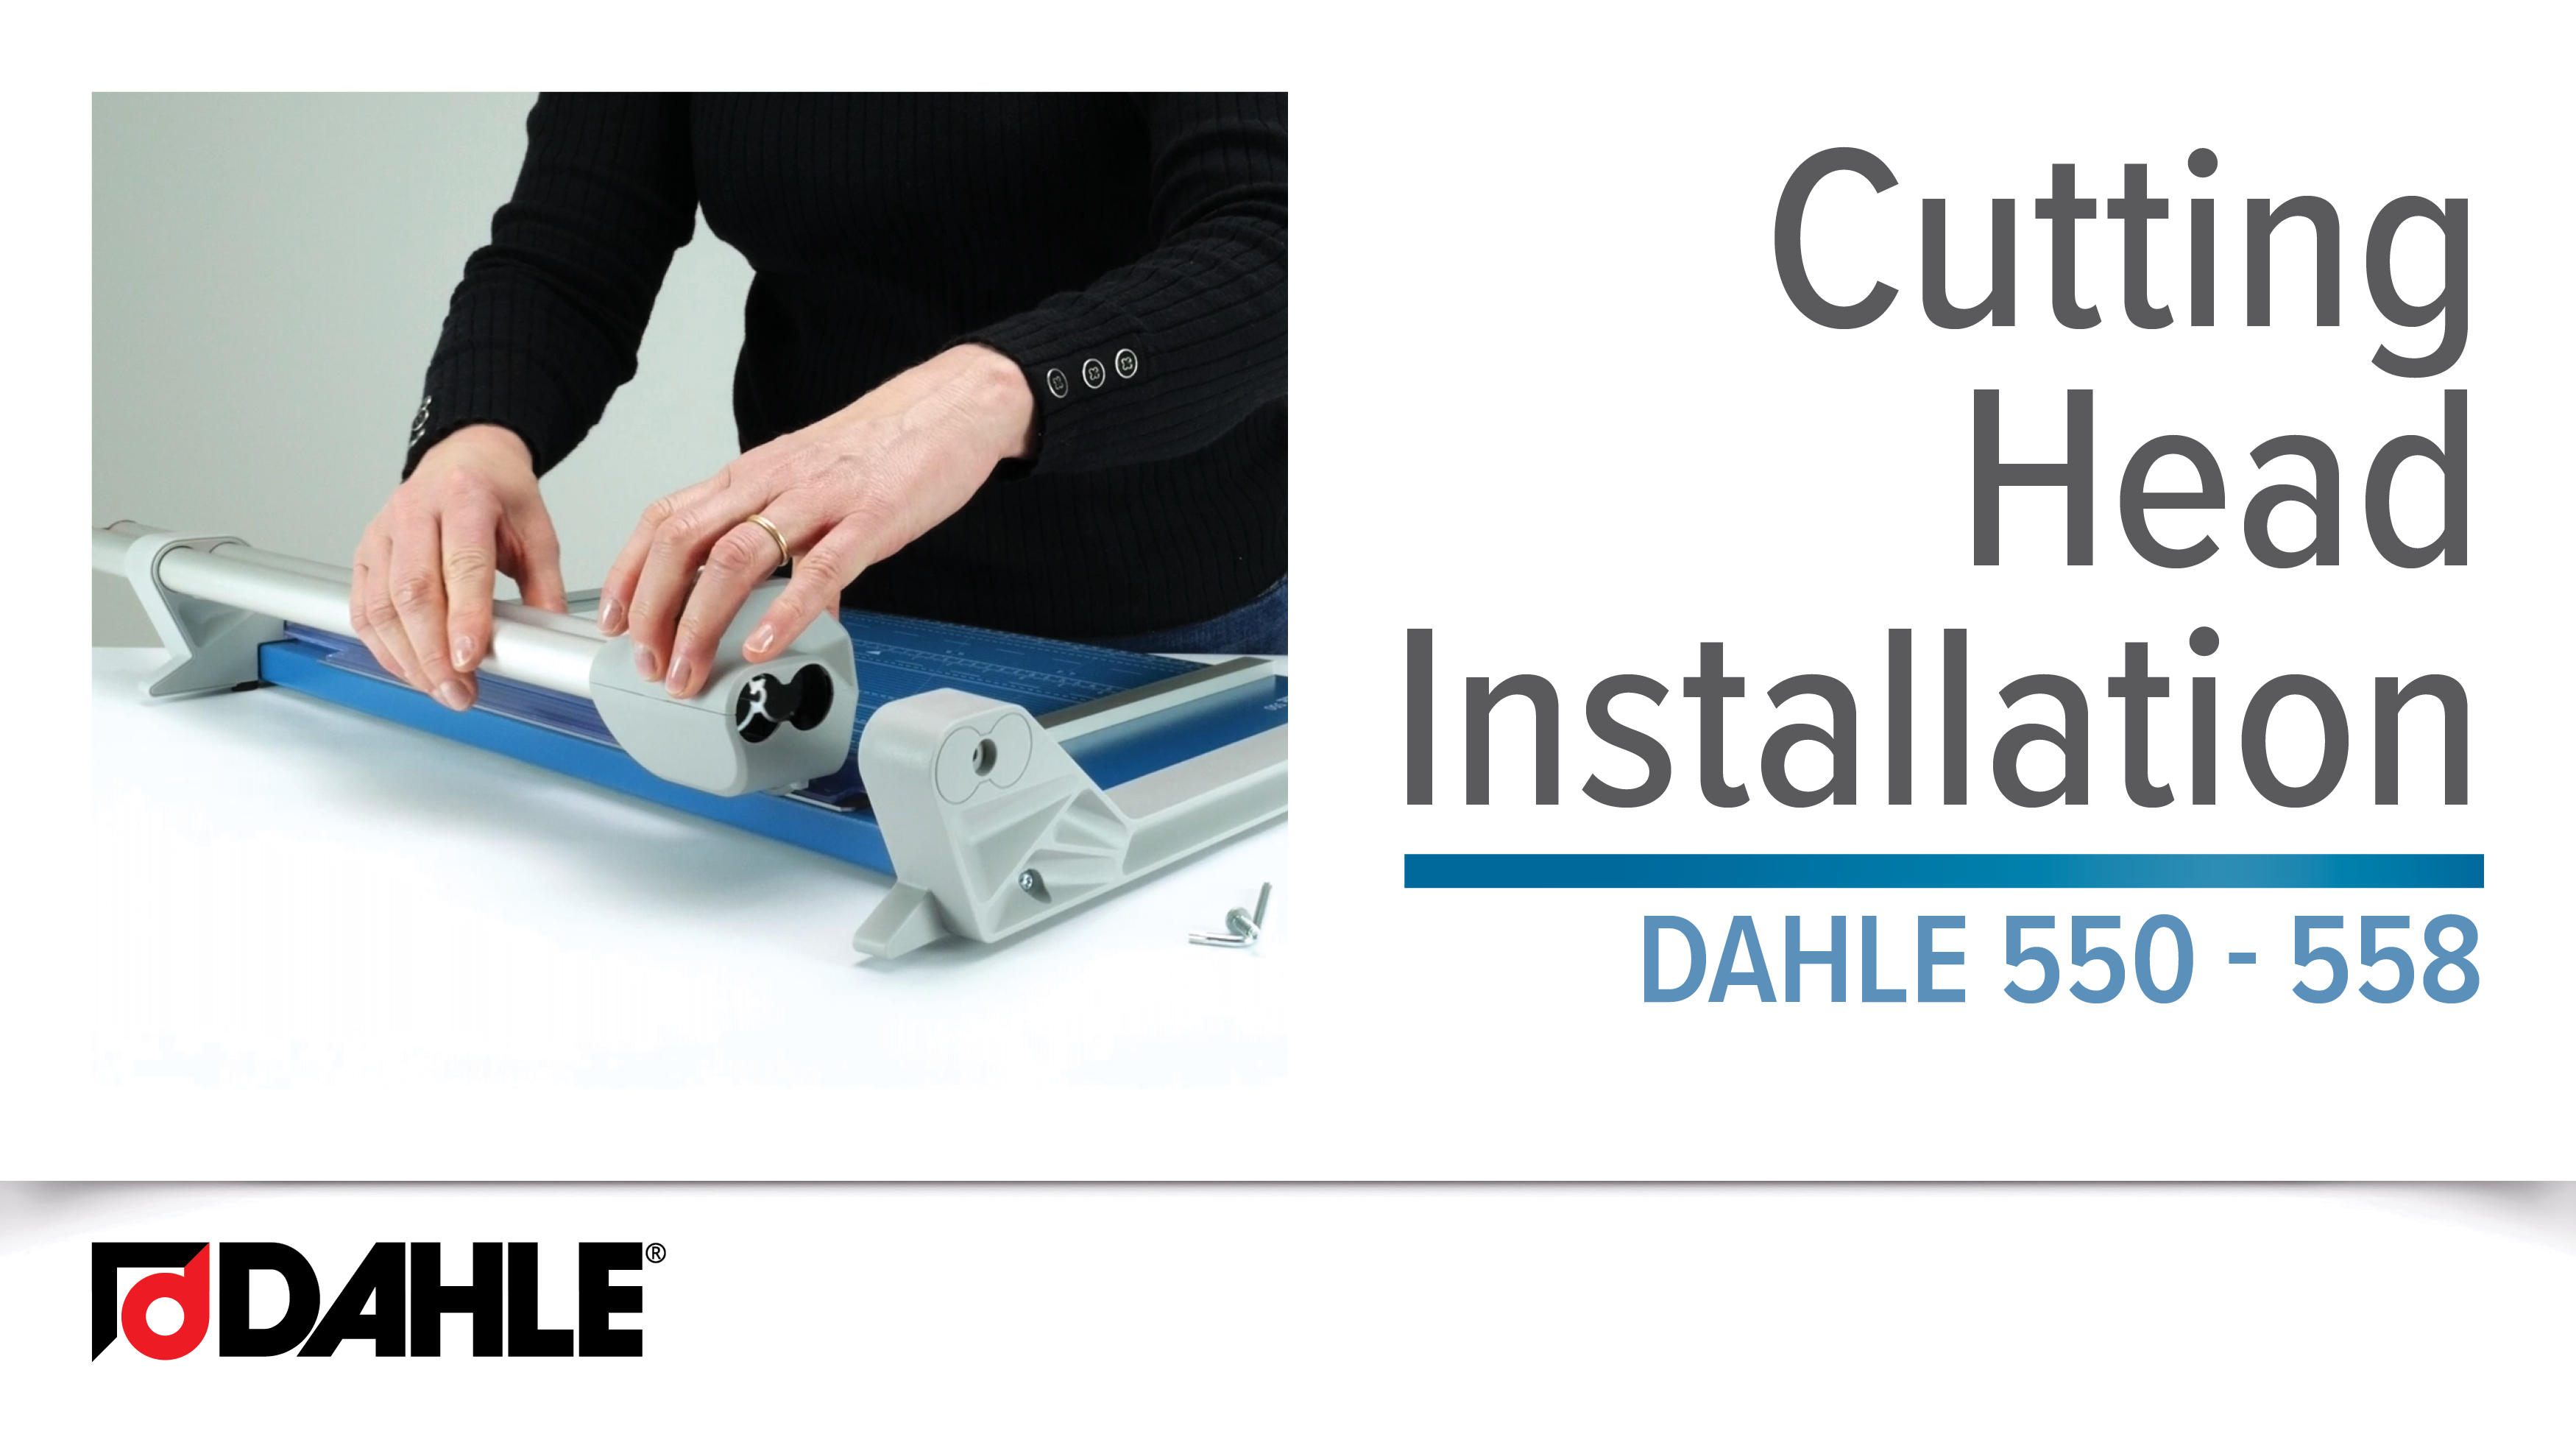 <big><strong>Dahle 550 - 558</strong></big>
<br>Professional Series